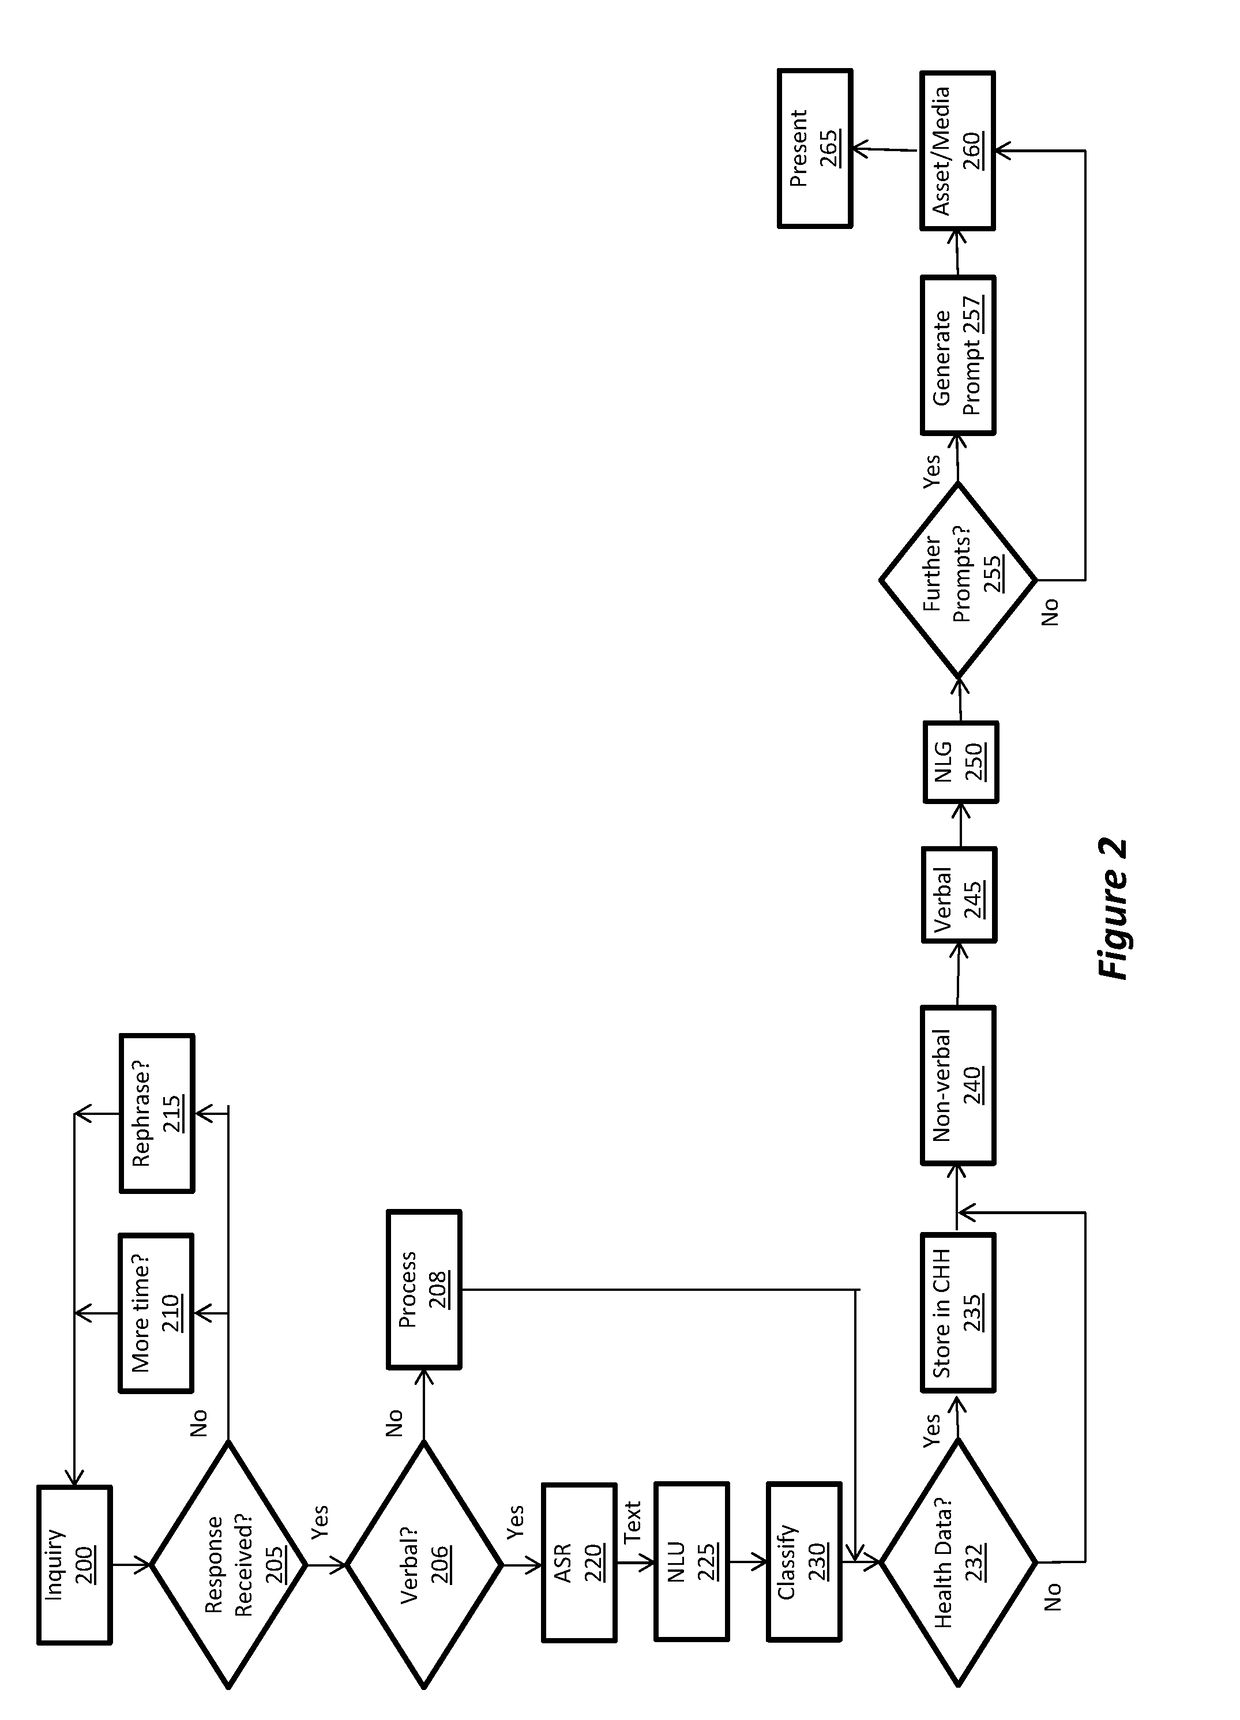 Method and system for patients data collection and analysis